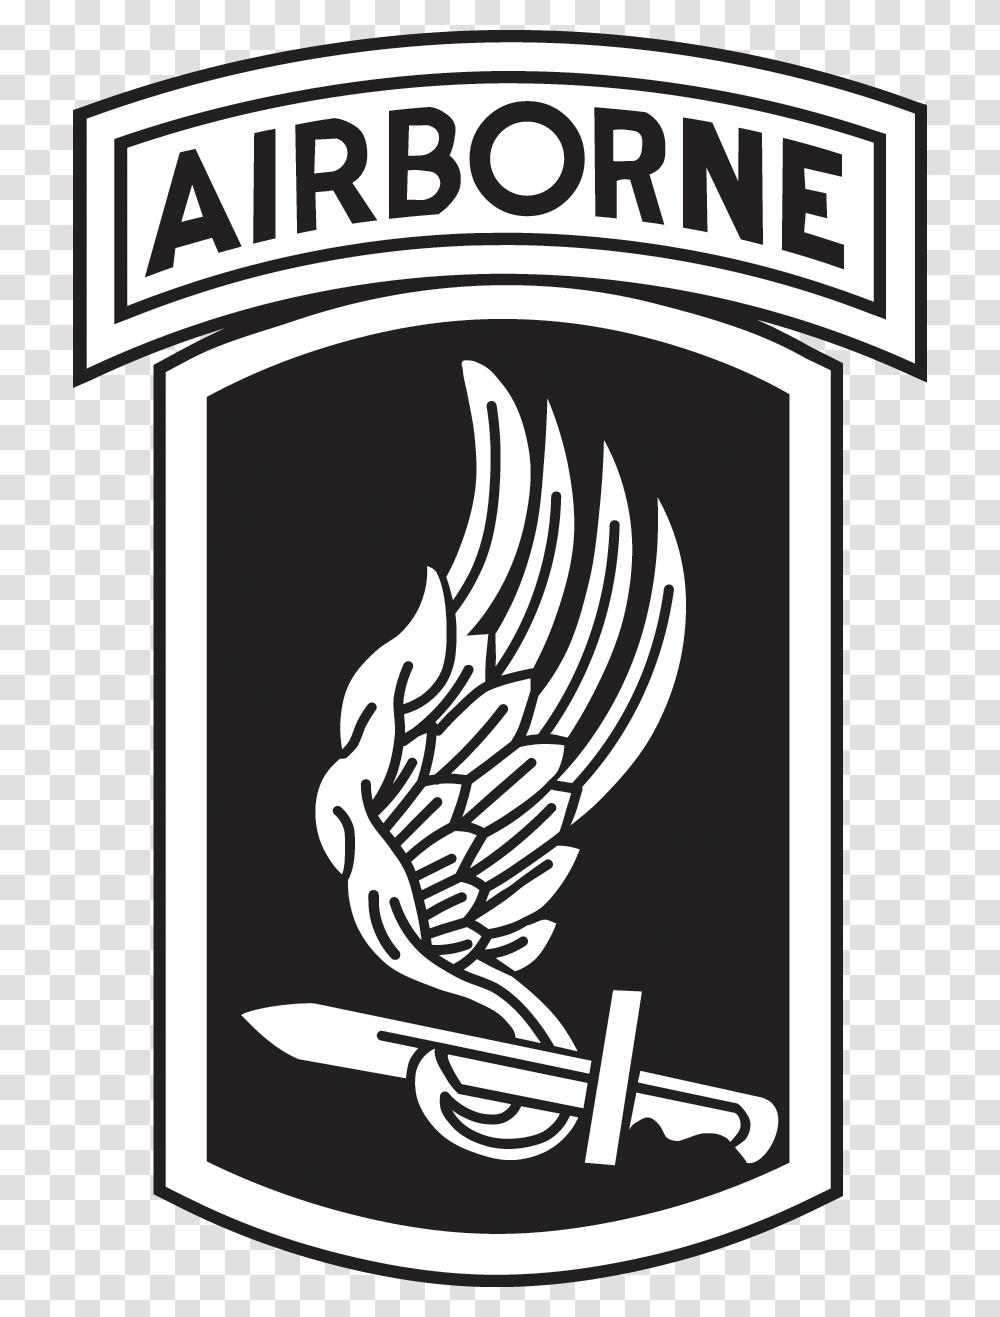 173rd Airborne Brigade 173rd Airborne Insignia Black And White, Emblem, Poster, Advertisement Transparent Png